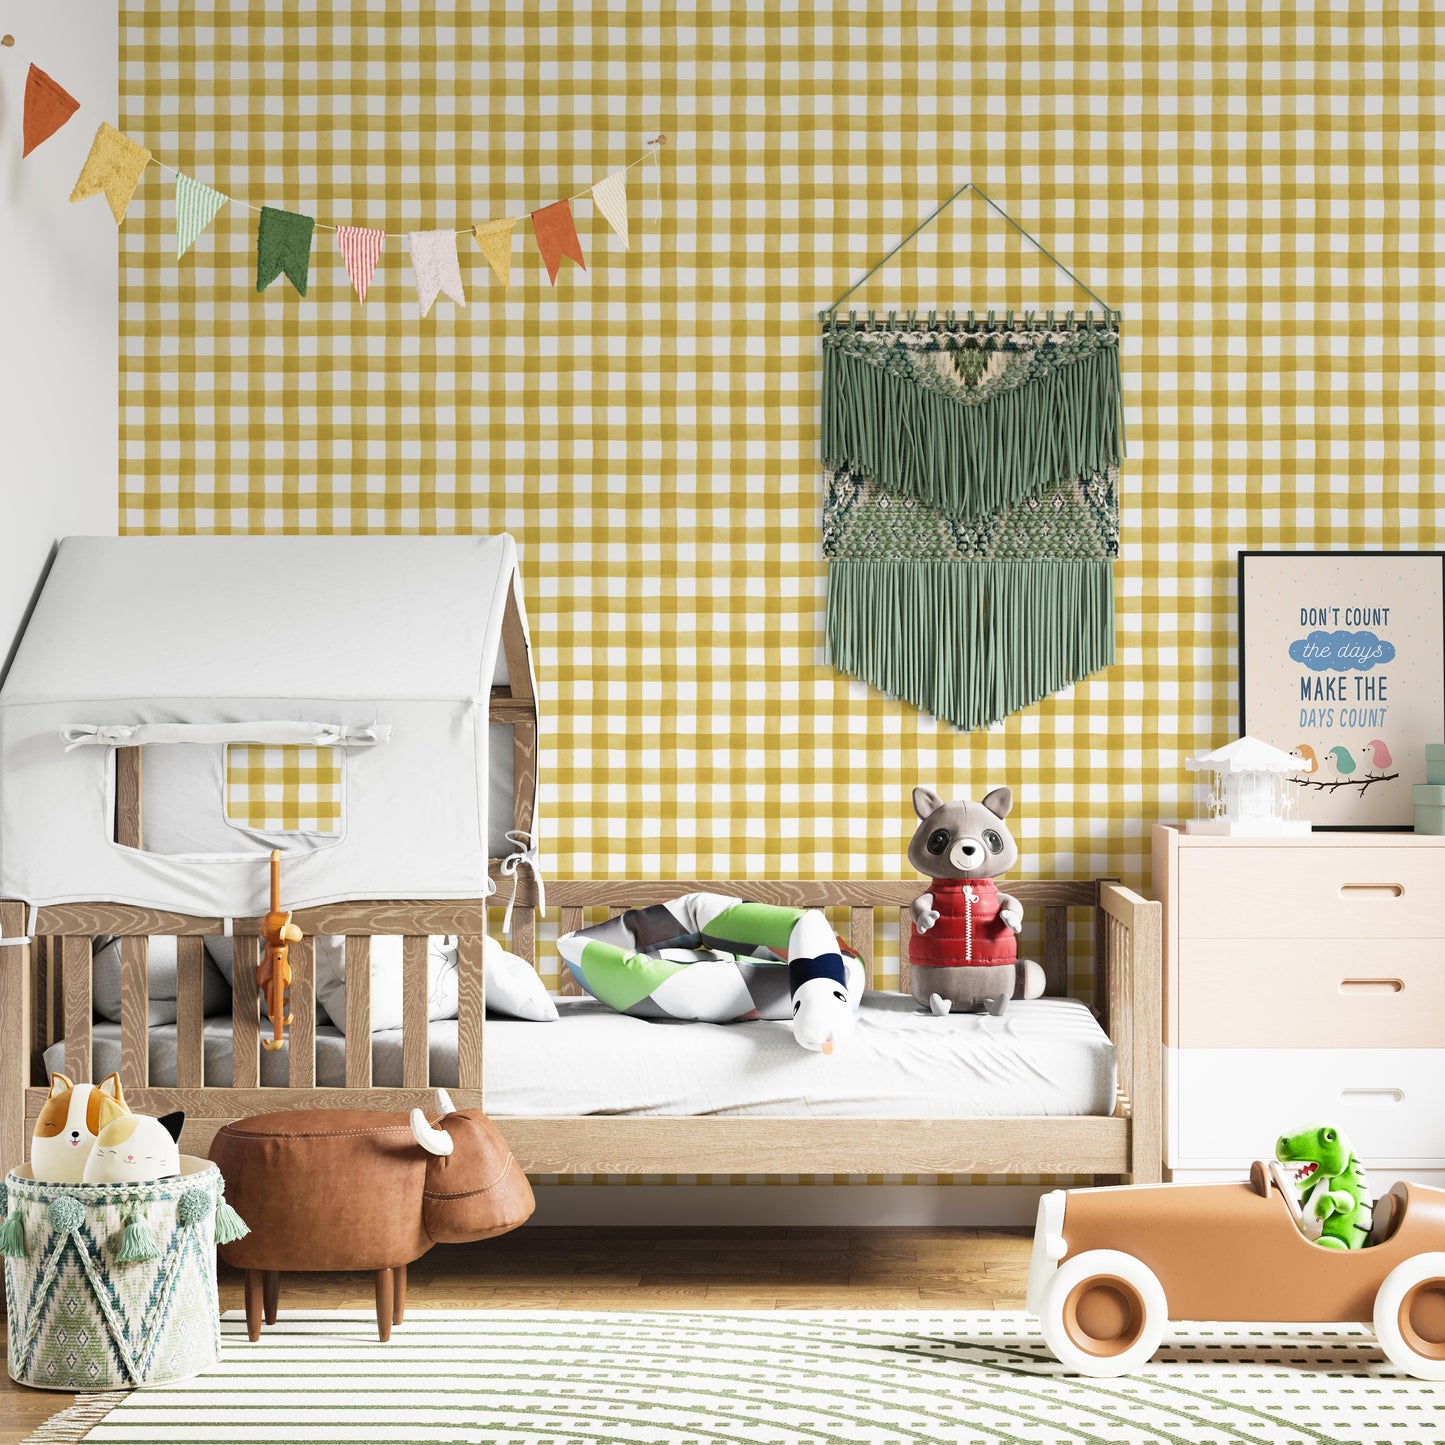 Transform Your Walls with Mustard Yellow Gingham Check Peel and Stick Wallpaper